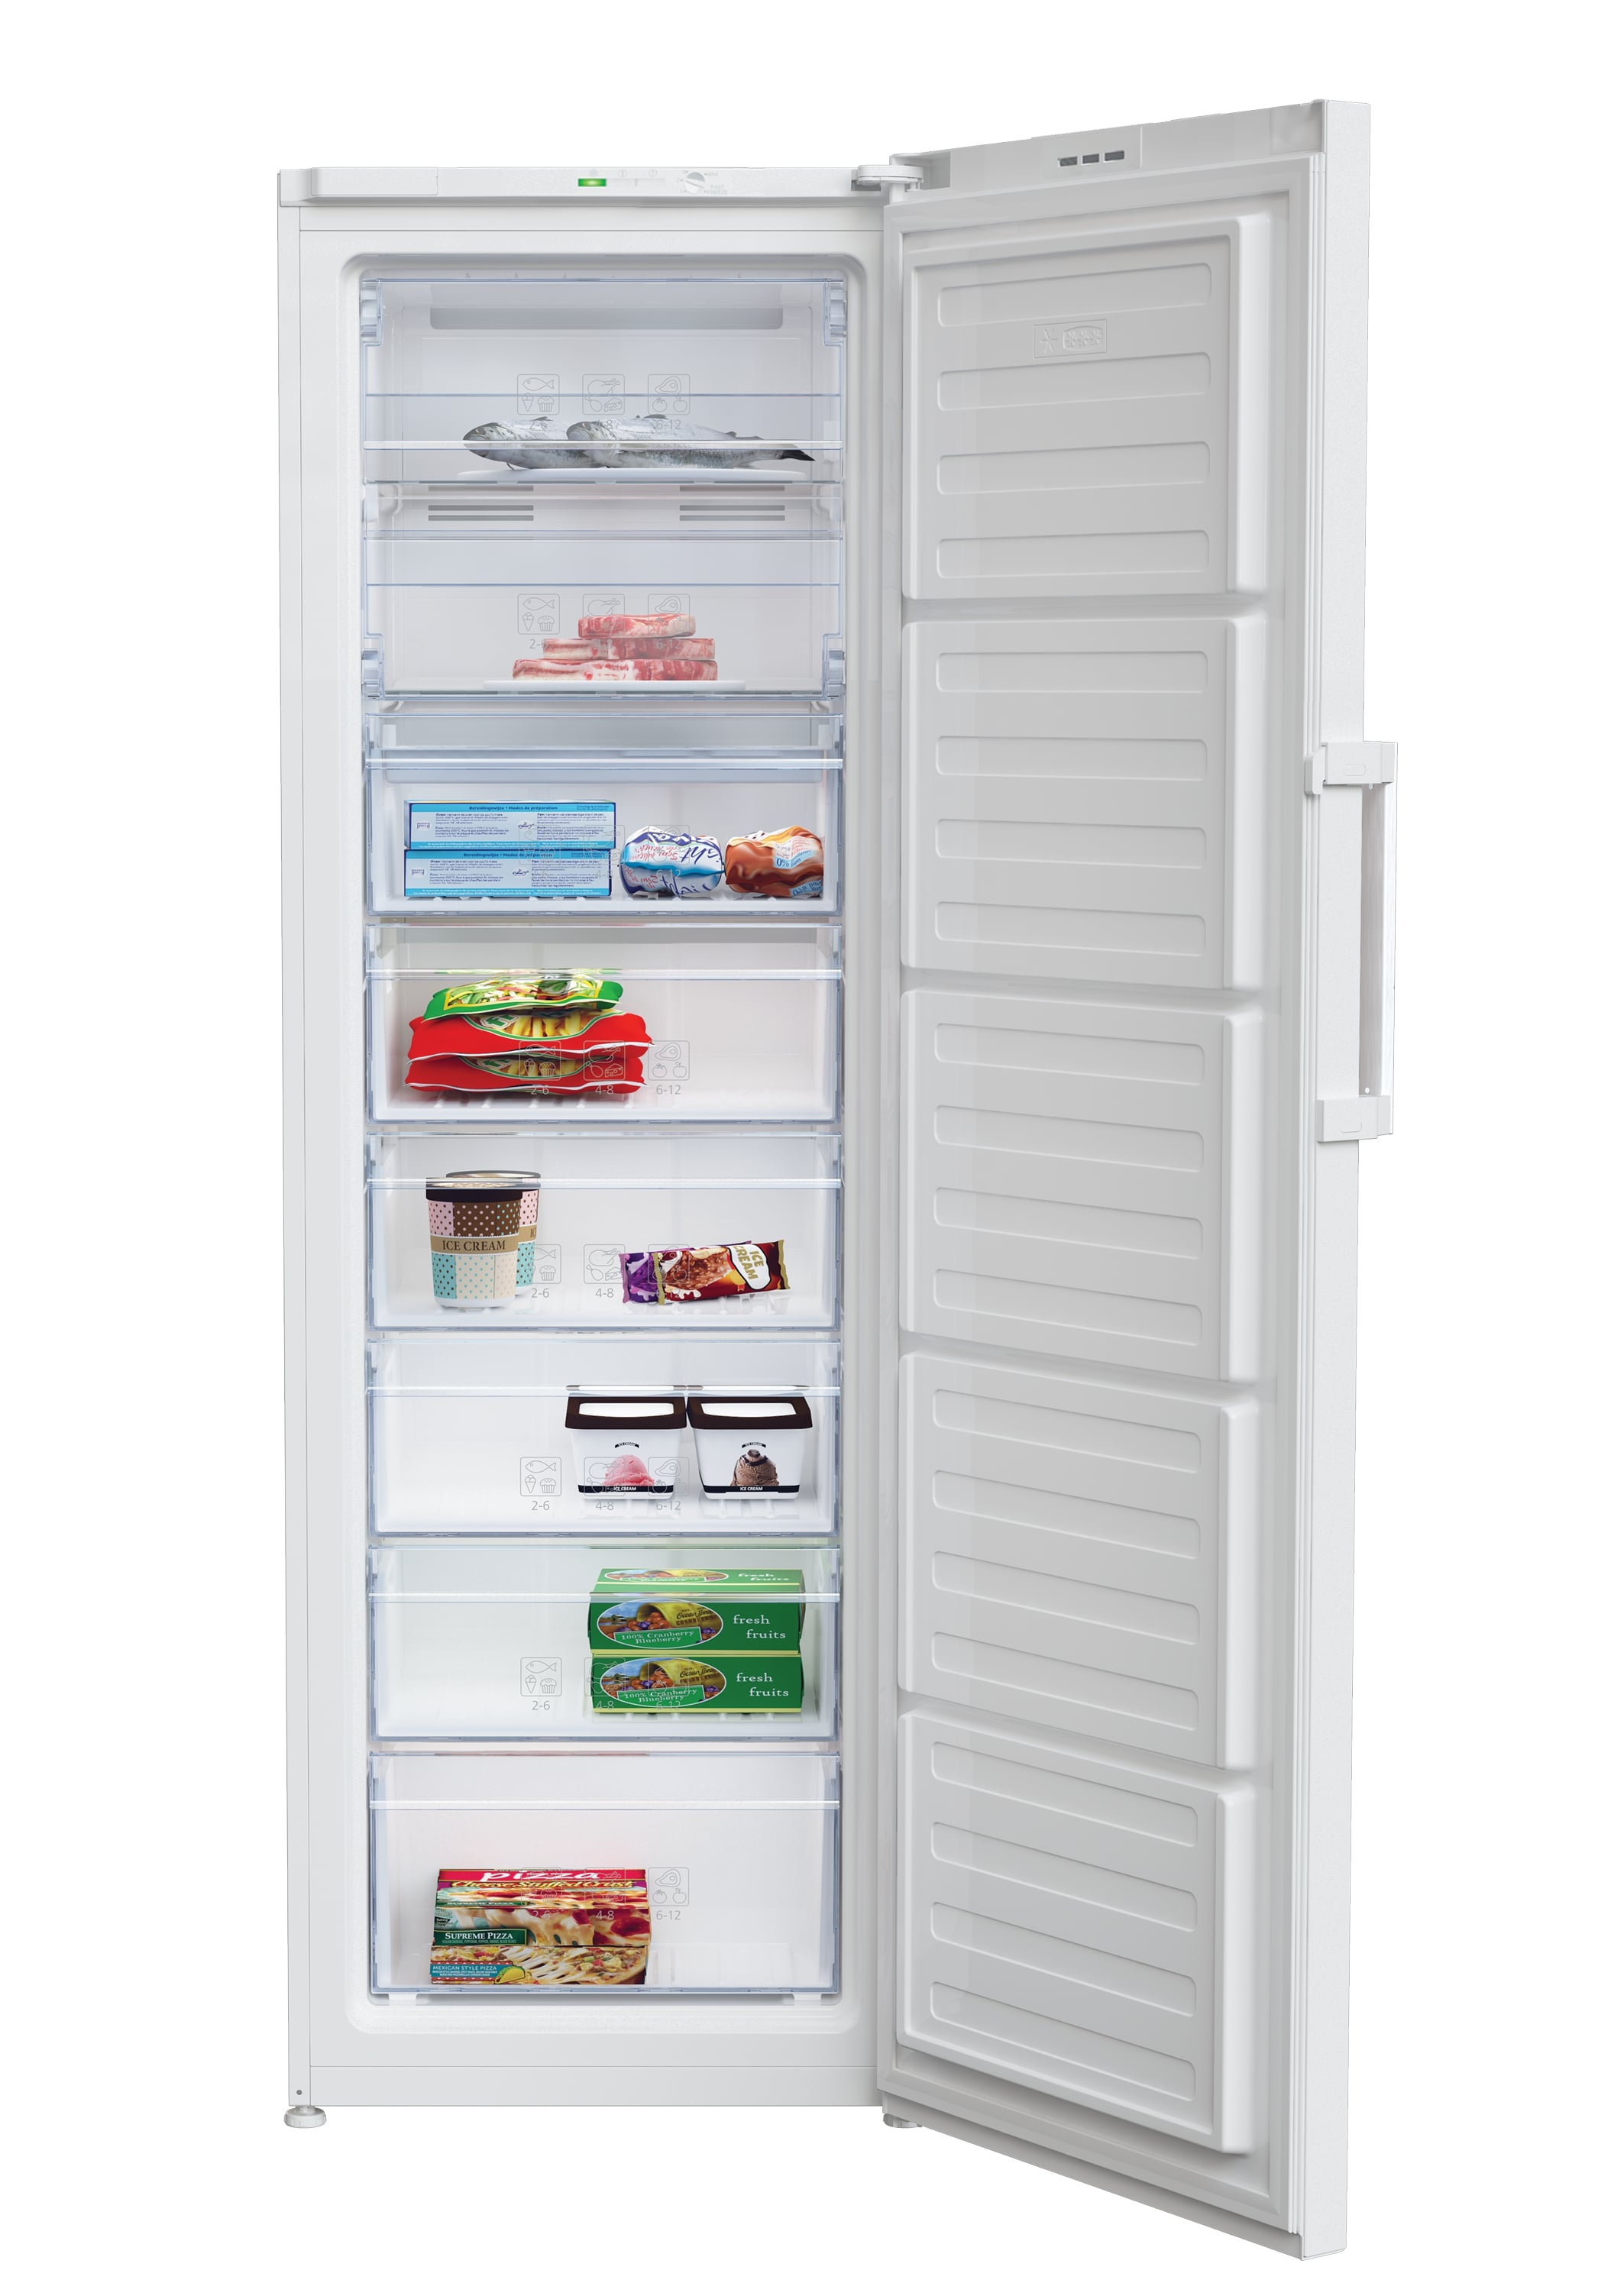 Beko 277 L Vertical Freezer with 6 Drawers